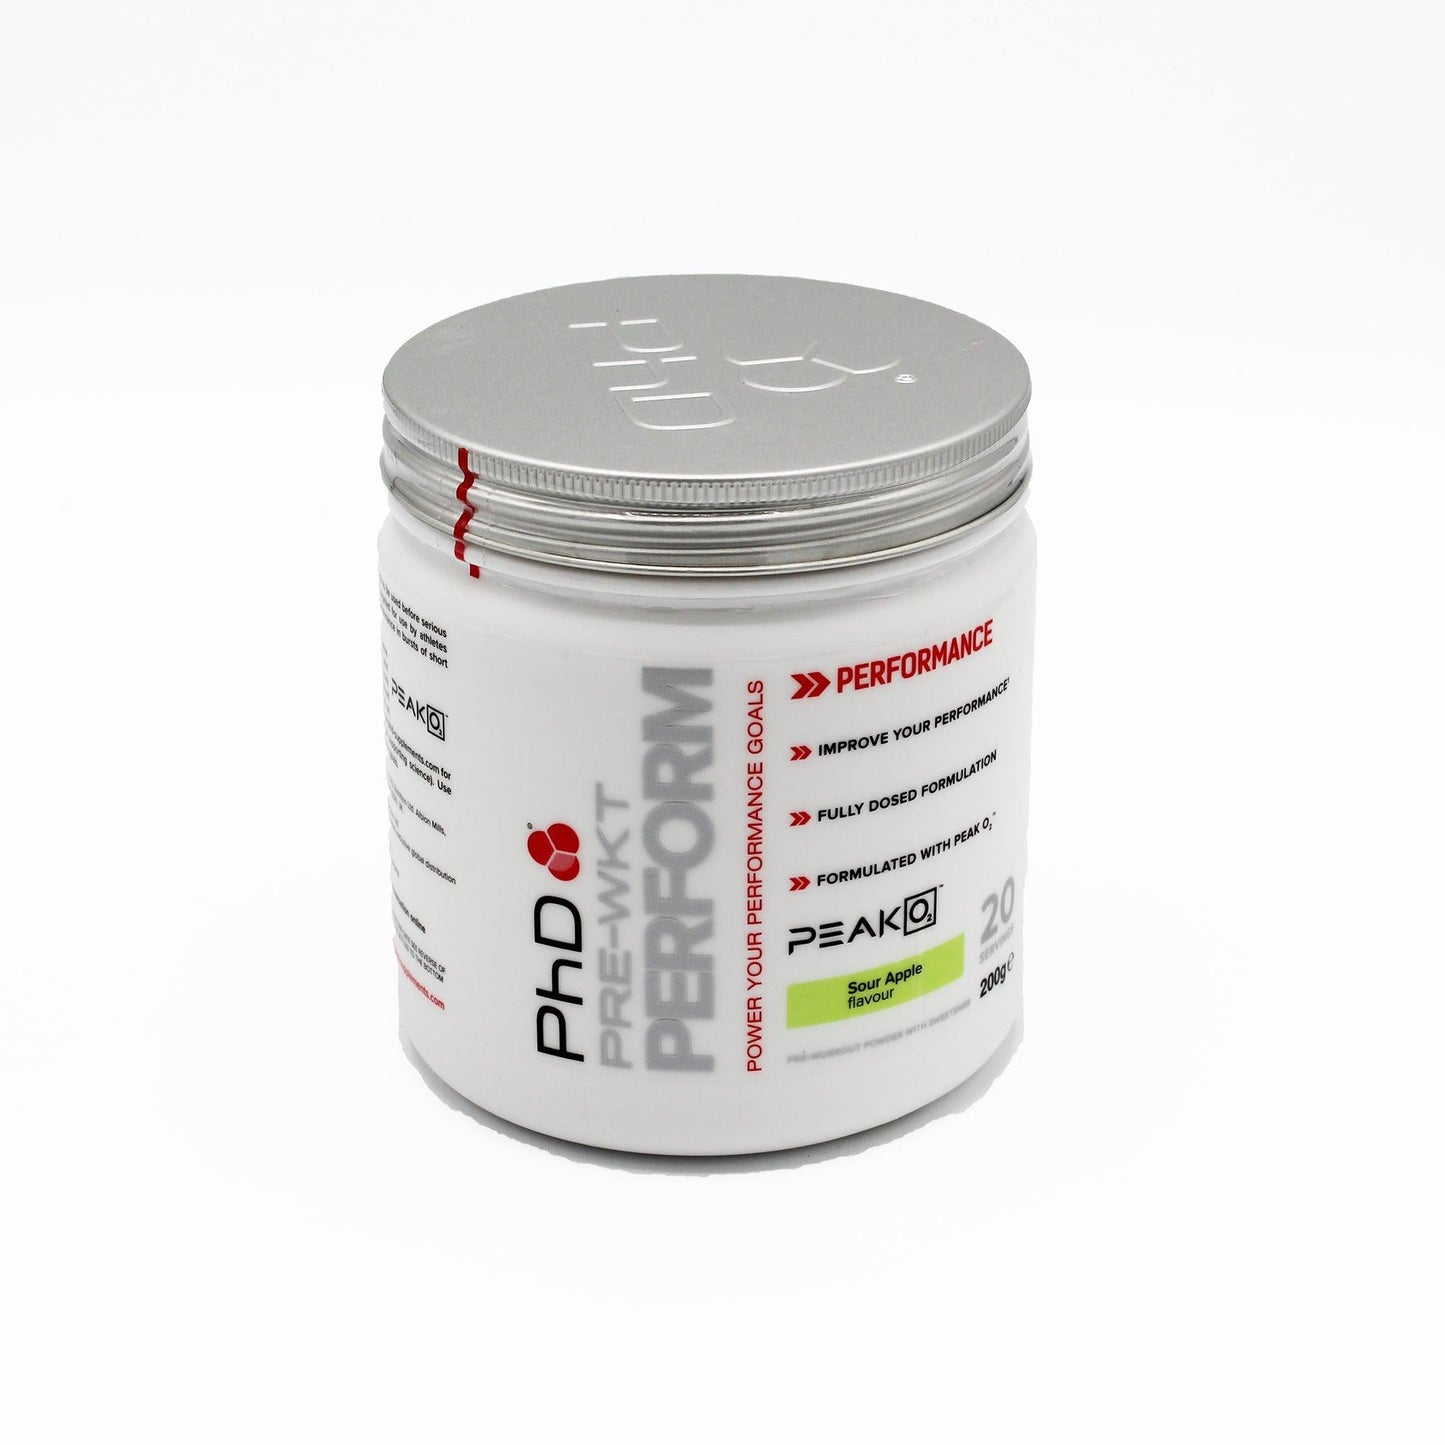 PhD Pre Workout Performance 200g - Fitness Health 